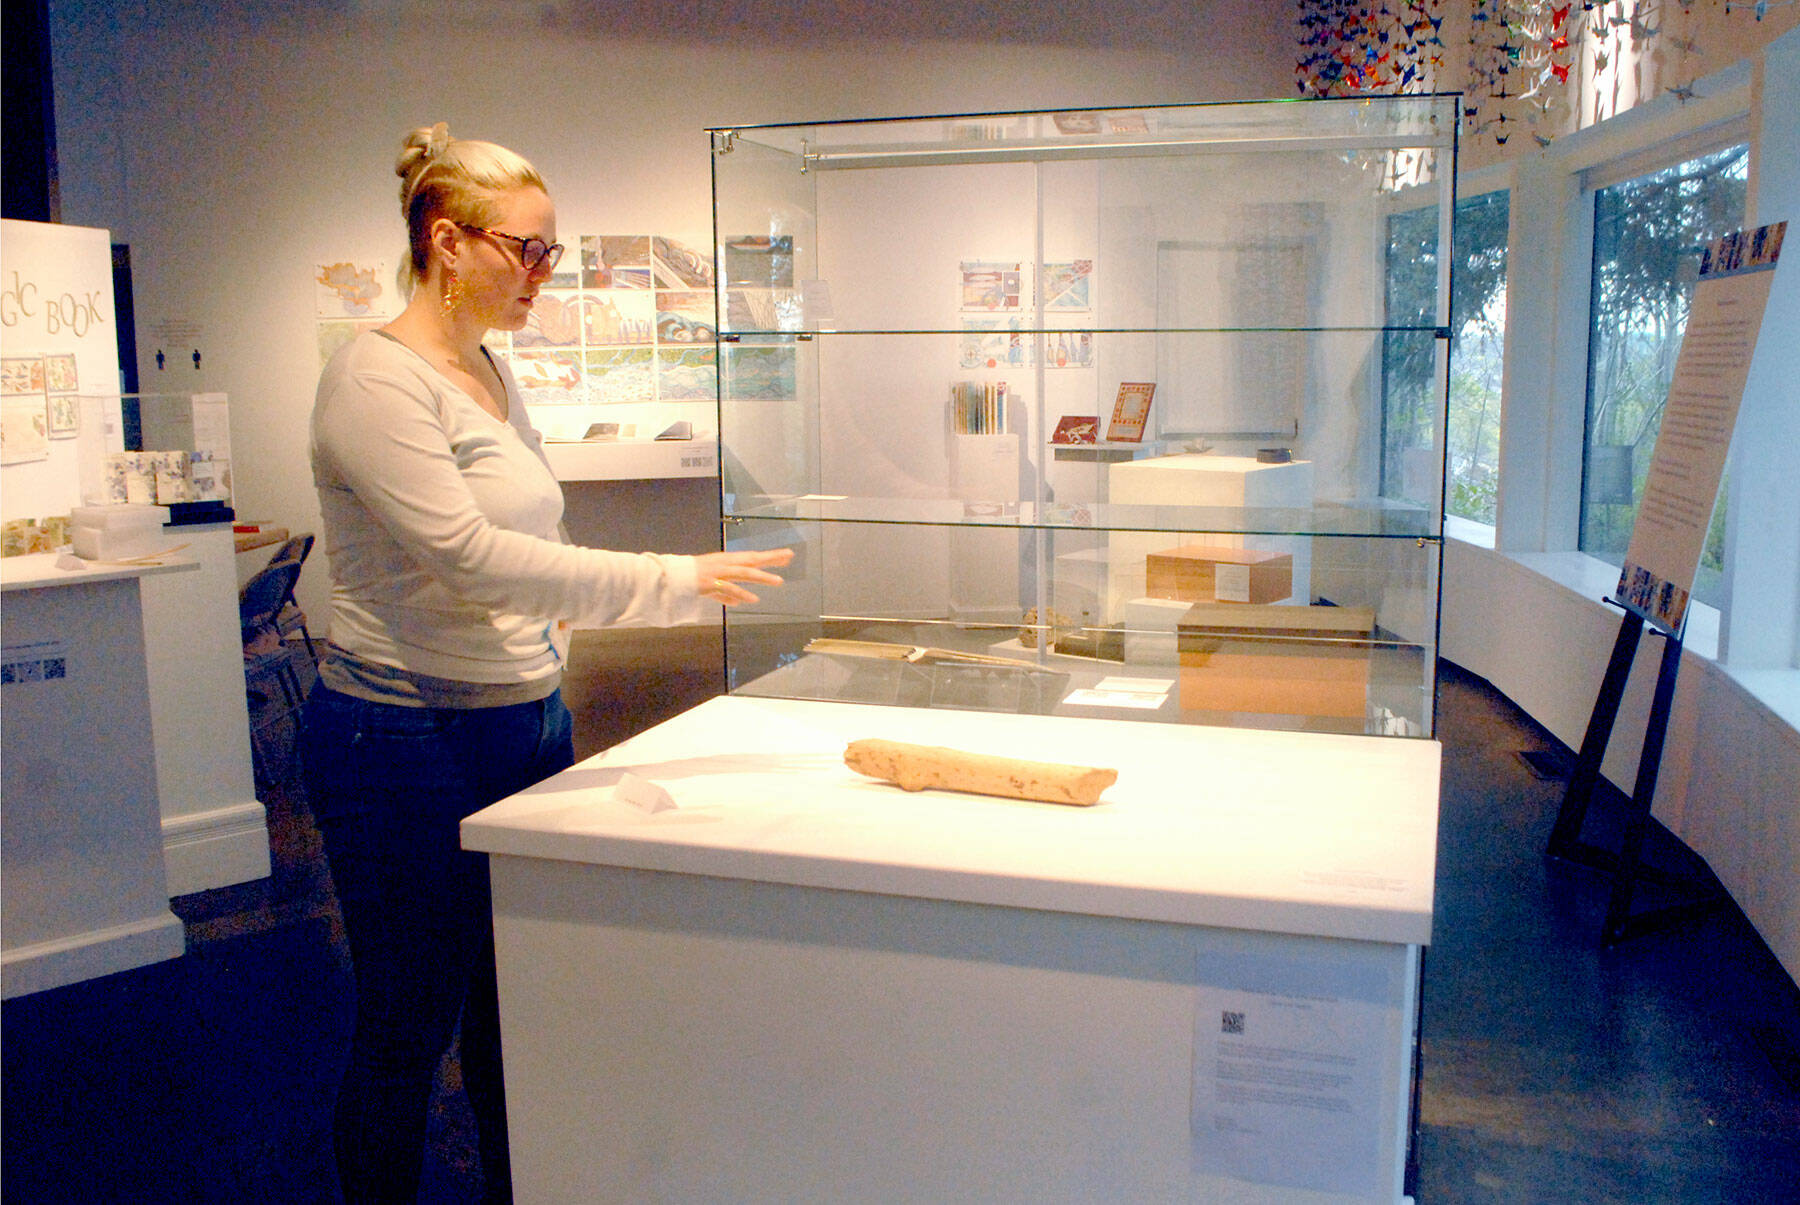 Rachel Storck, community engagement manager for the Port Angeles Fine Arts Center, points out a display case where exhibit pieces were taken during a weekend burglary. (Keith Thorpe/Peninsula Daily News)